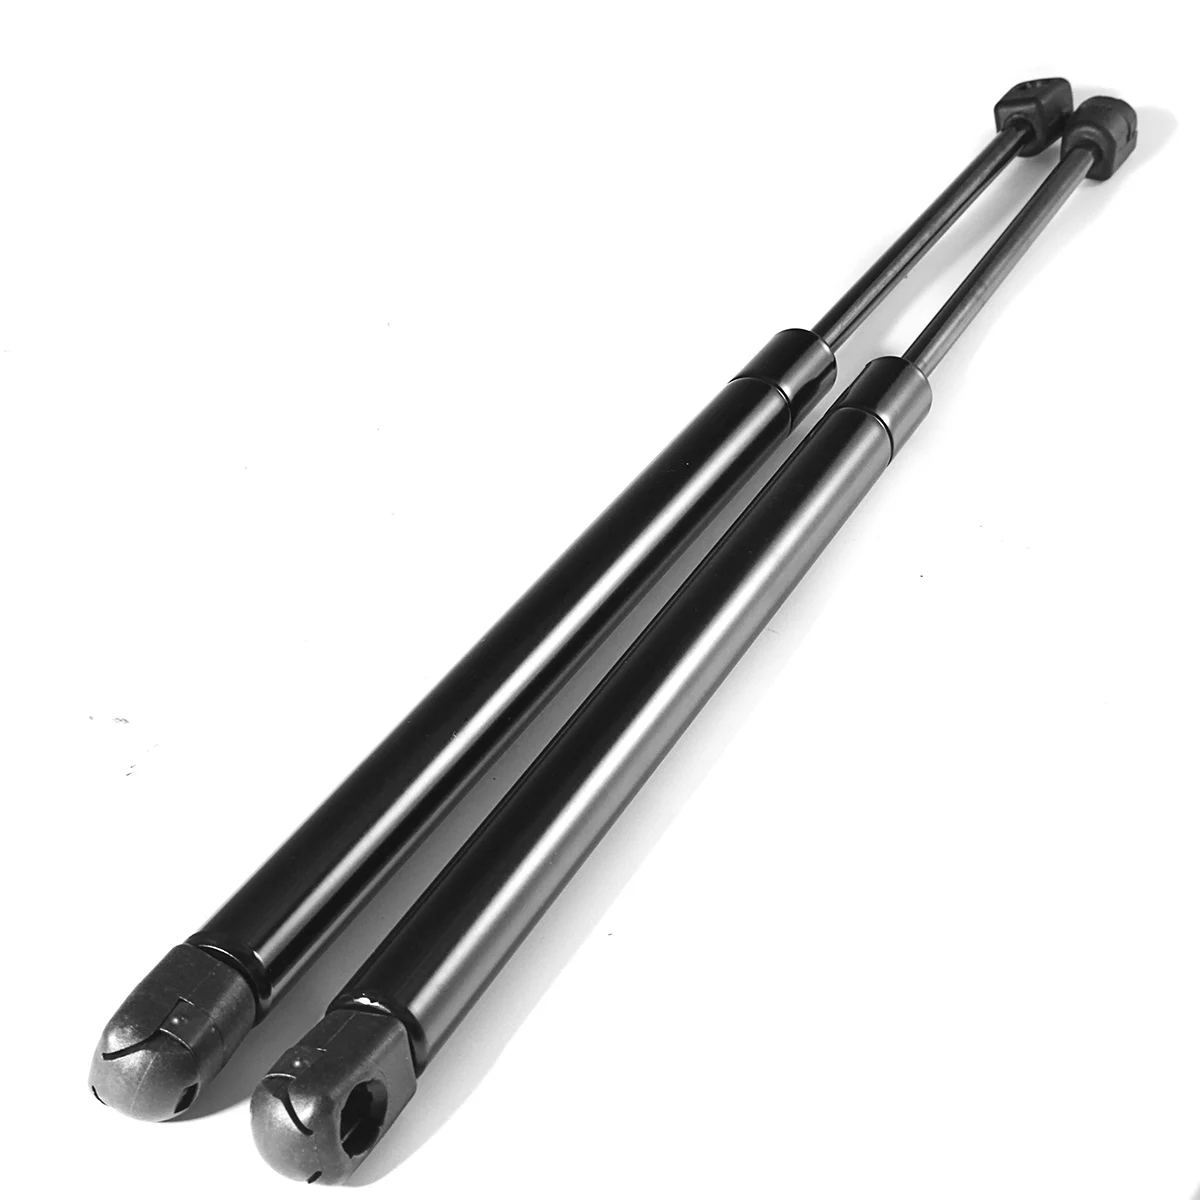 

50cm Pair Gas Tailgate Boot Hood Lift Support Strut for Vauxhall Vectra C Hatchback 2002 2003 2004 2005 2006 2007 2008